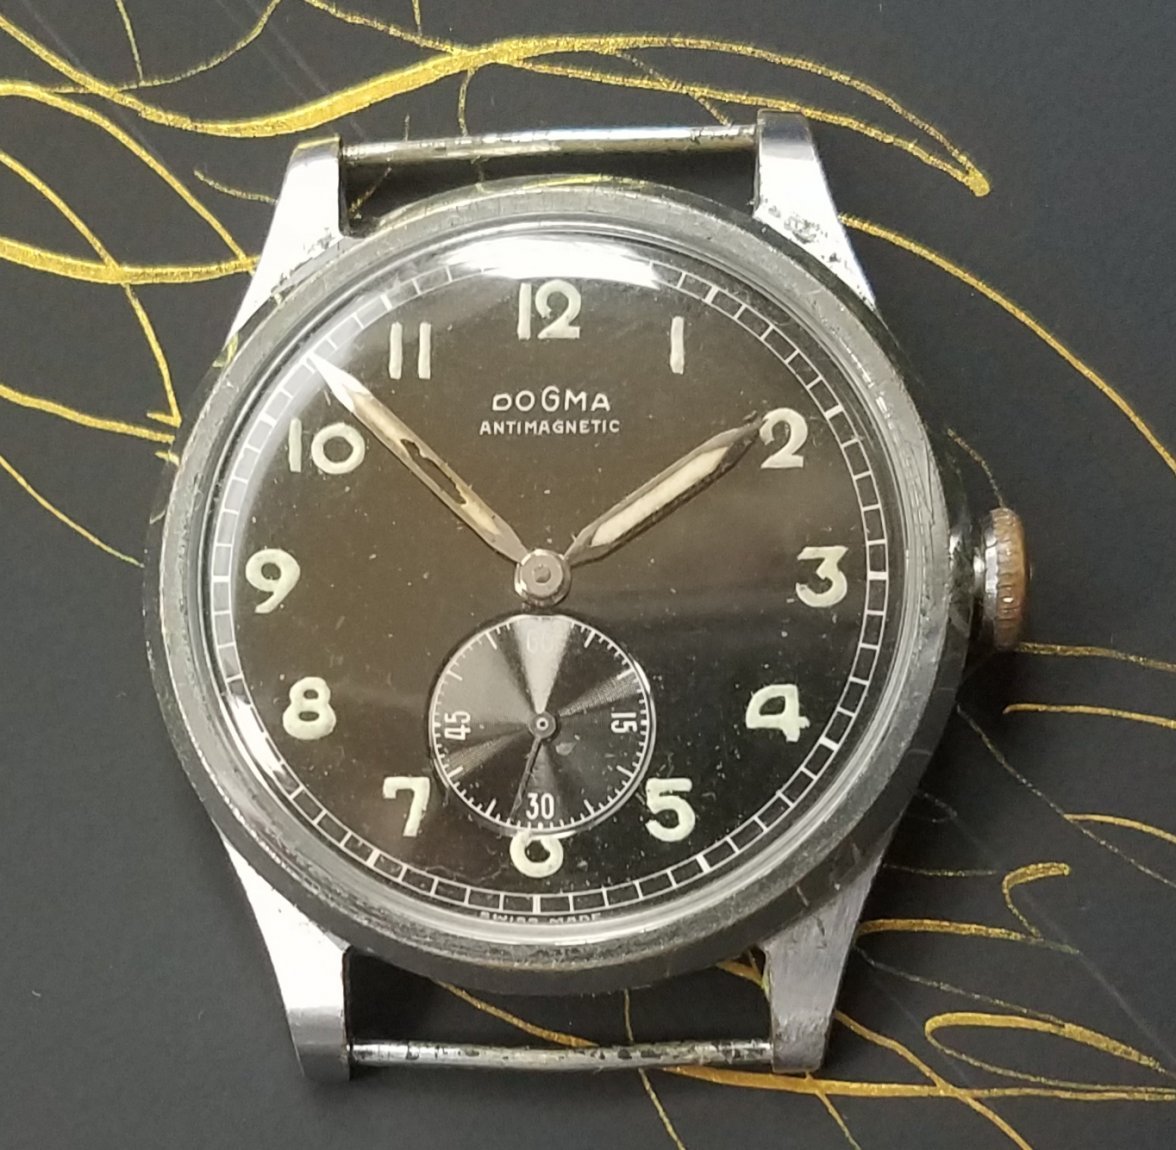 If anyone familiar with Dogma military watches? | Omega Forums